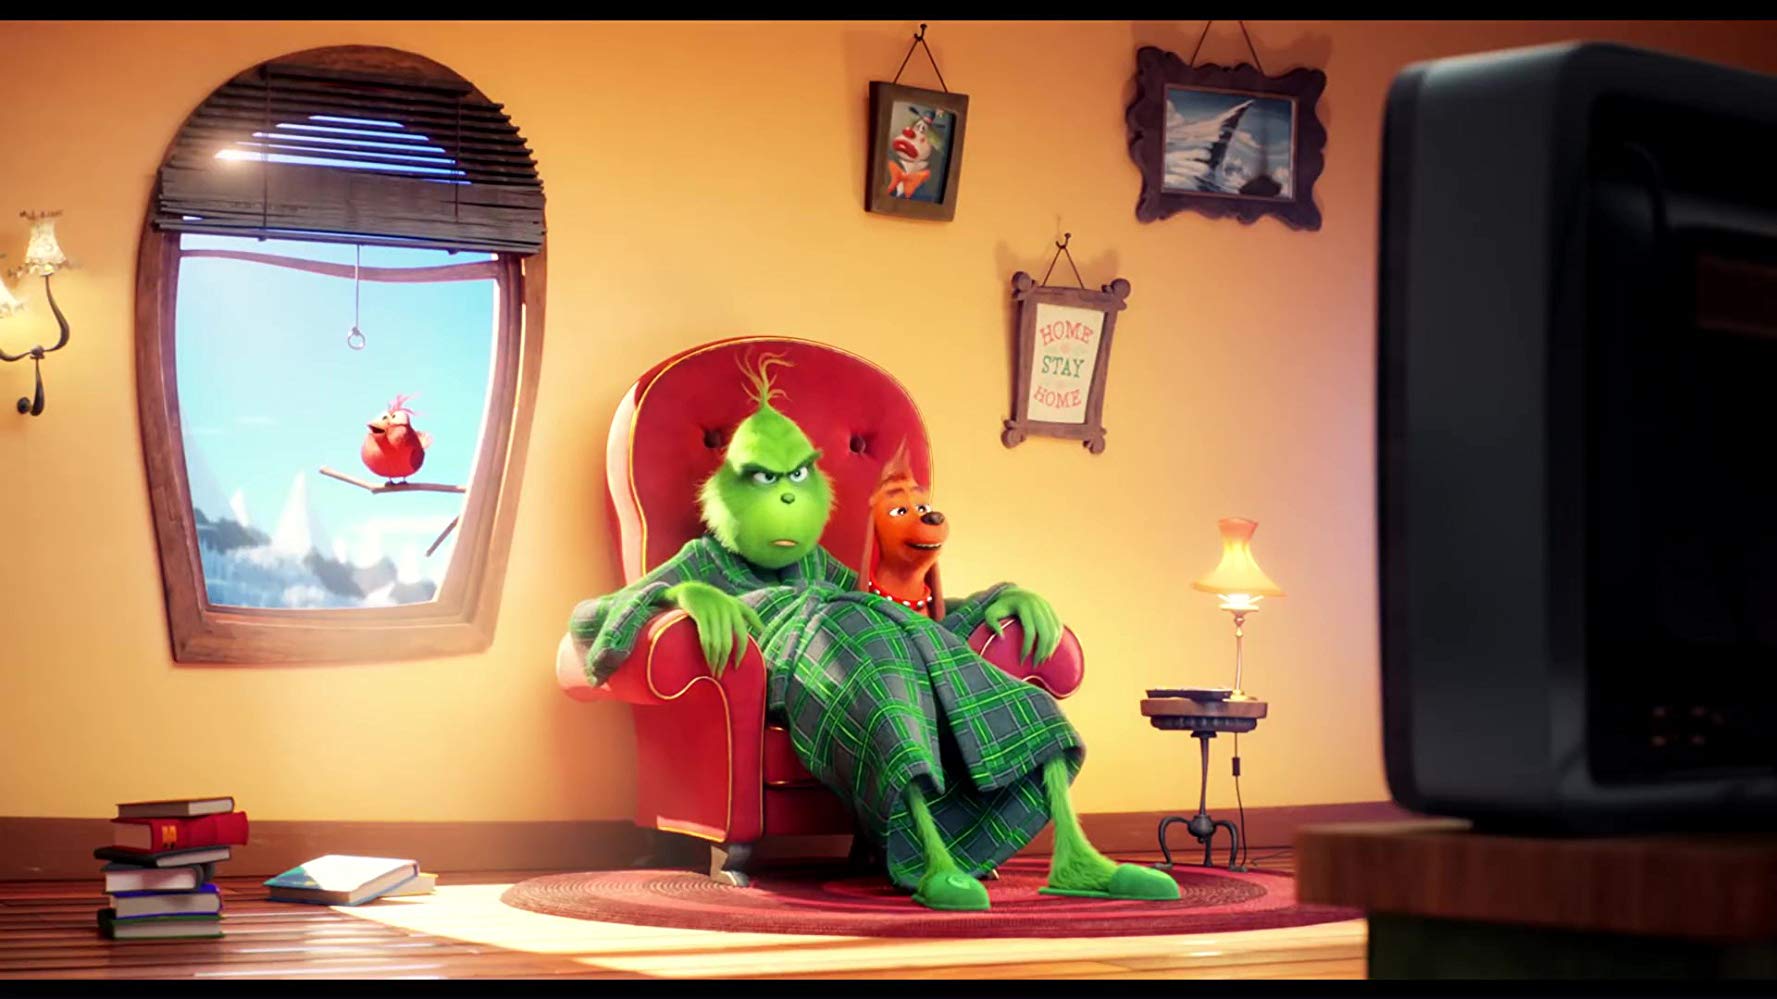 The Grinch in his chair